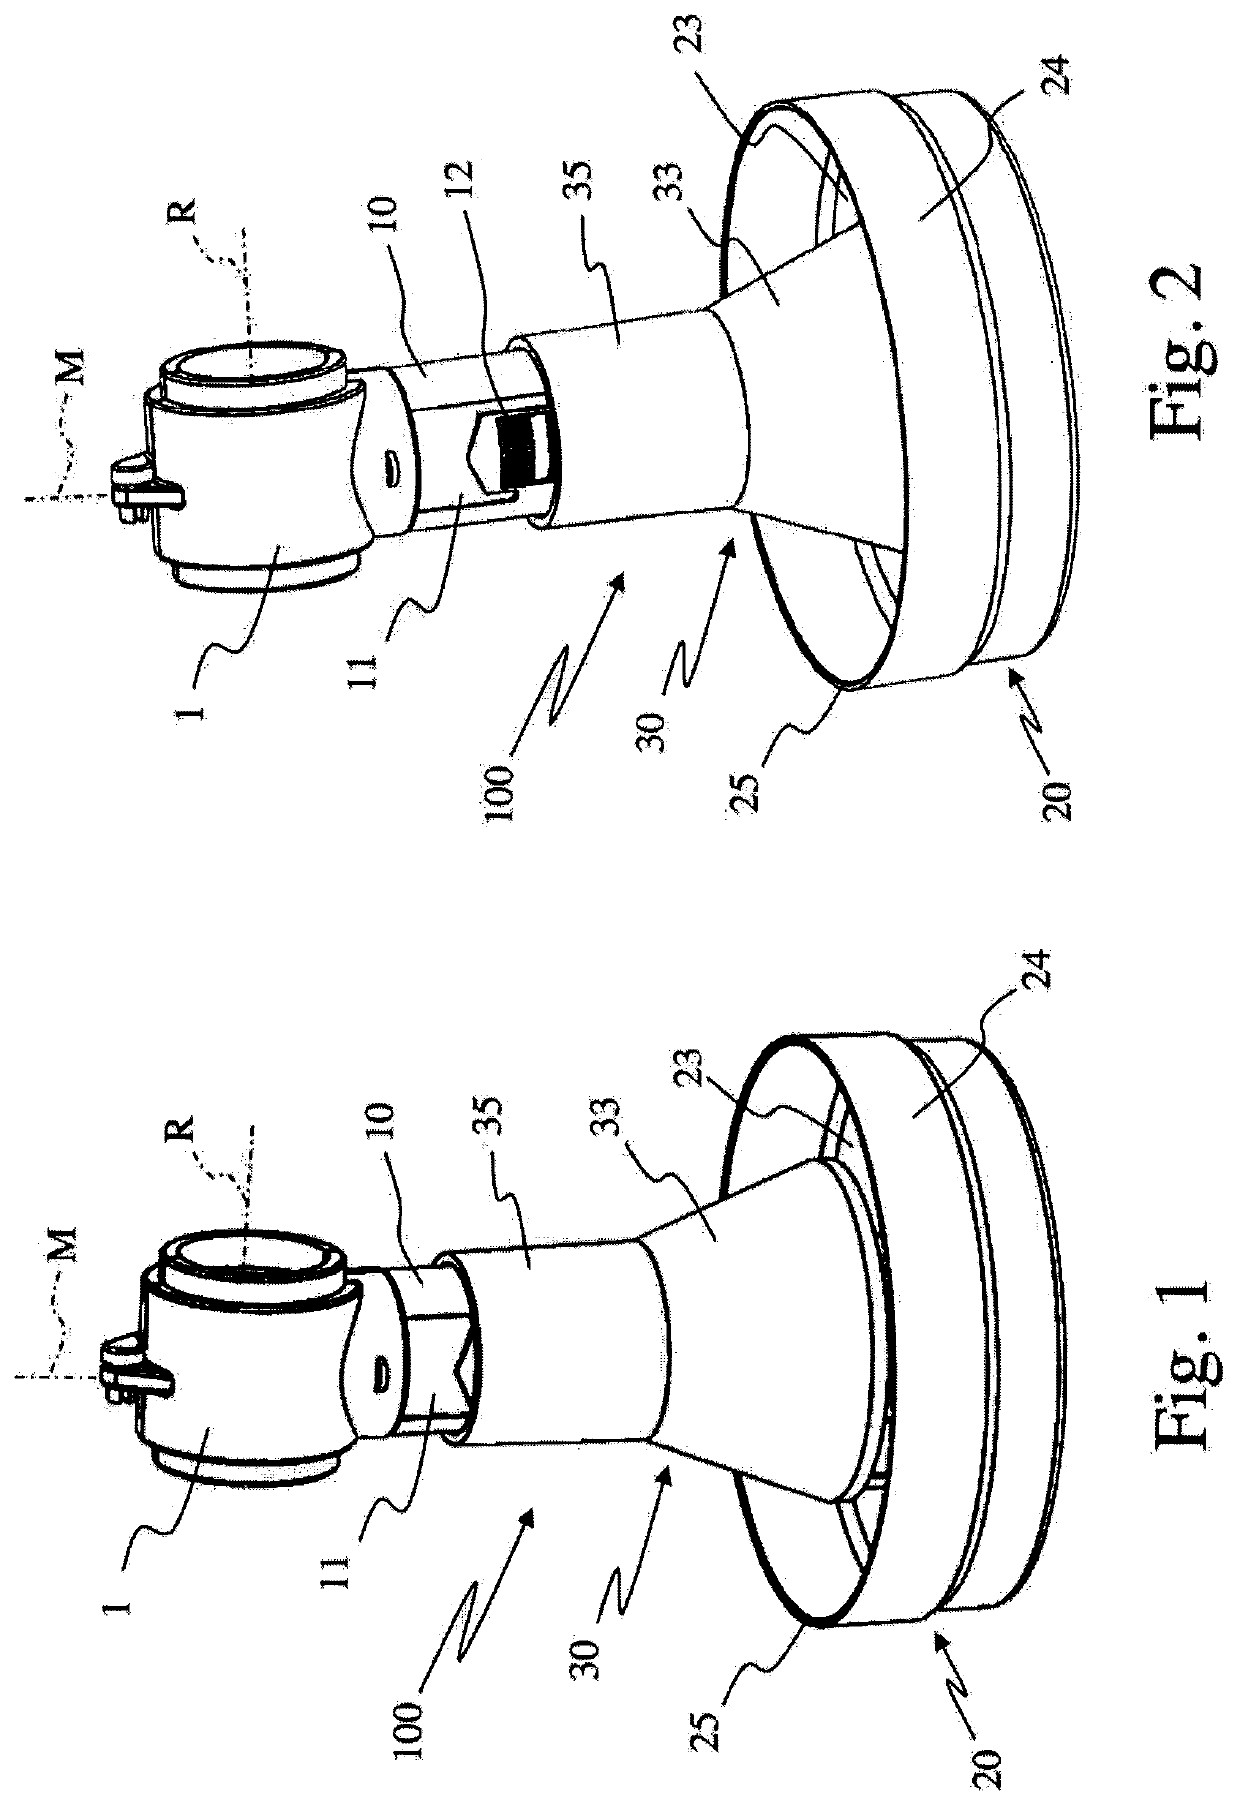 Feeding dispenser for animal breeding with improved adjustment of the feed level